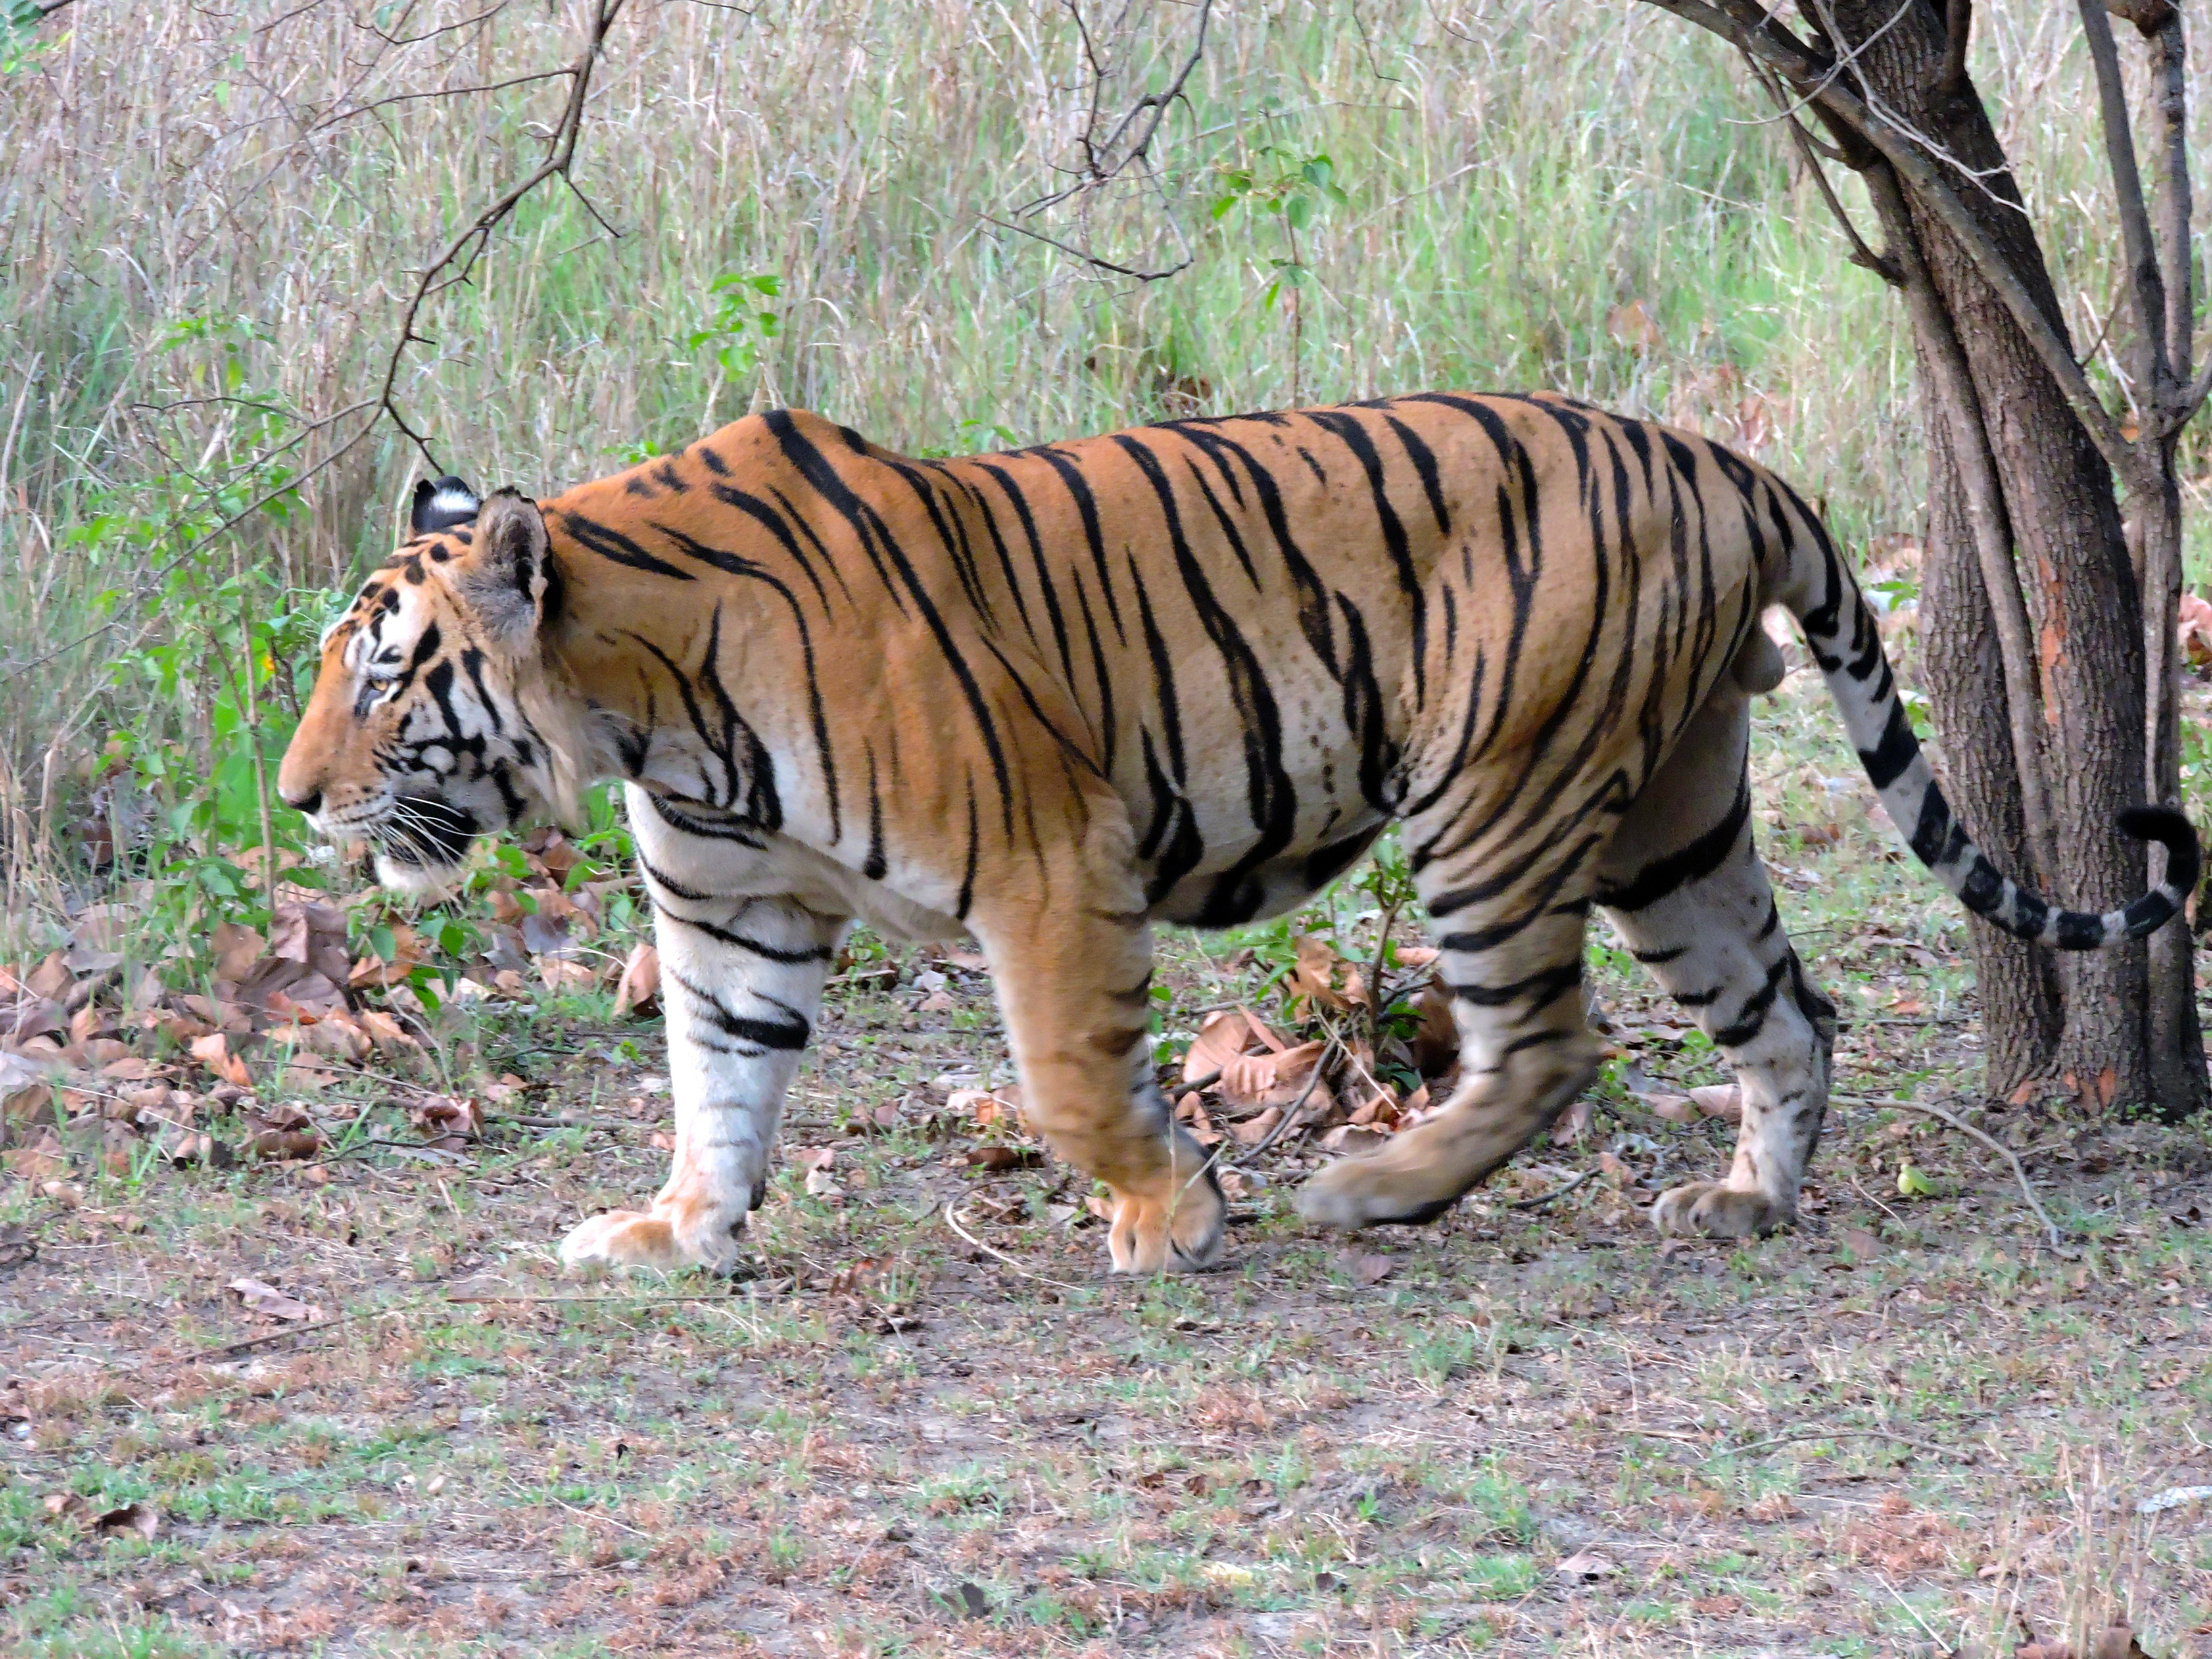 What is the scientific name of Bengal tiger?